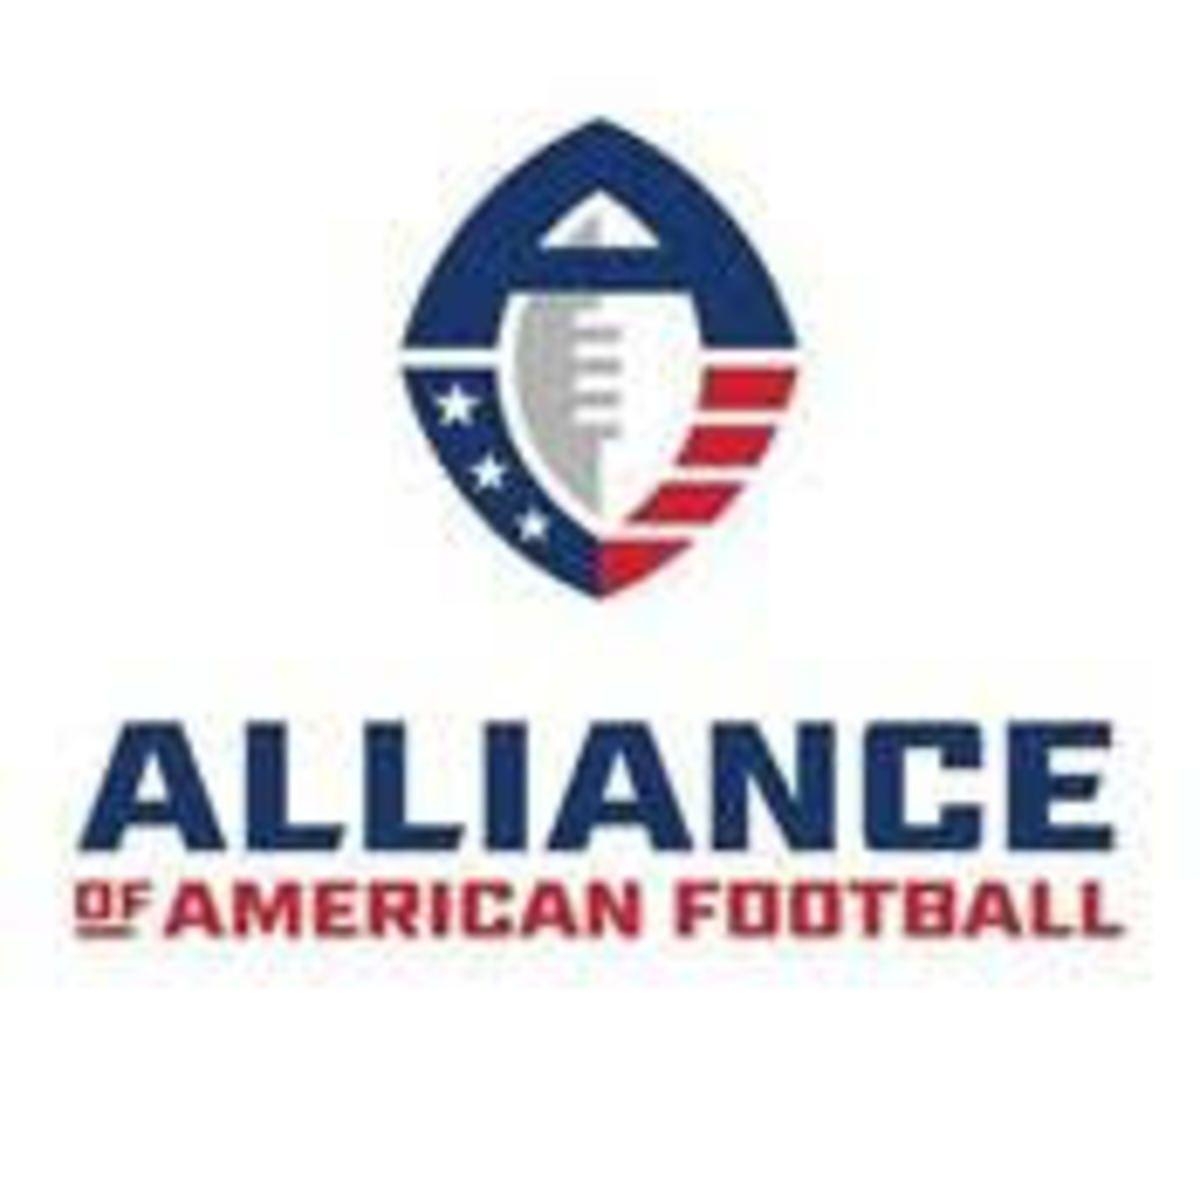 American Match Company Logo - New Football League Ratings Match NBA Game on ABC - Broadcasting & Cable